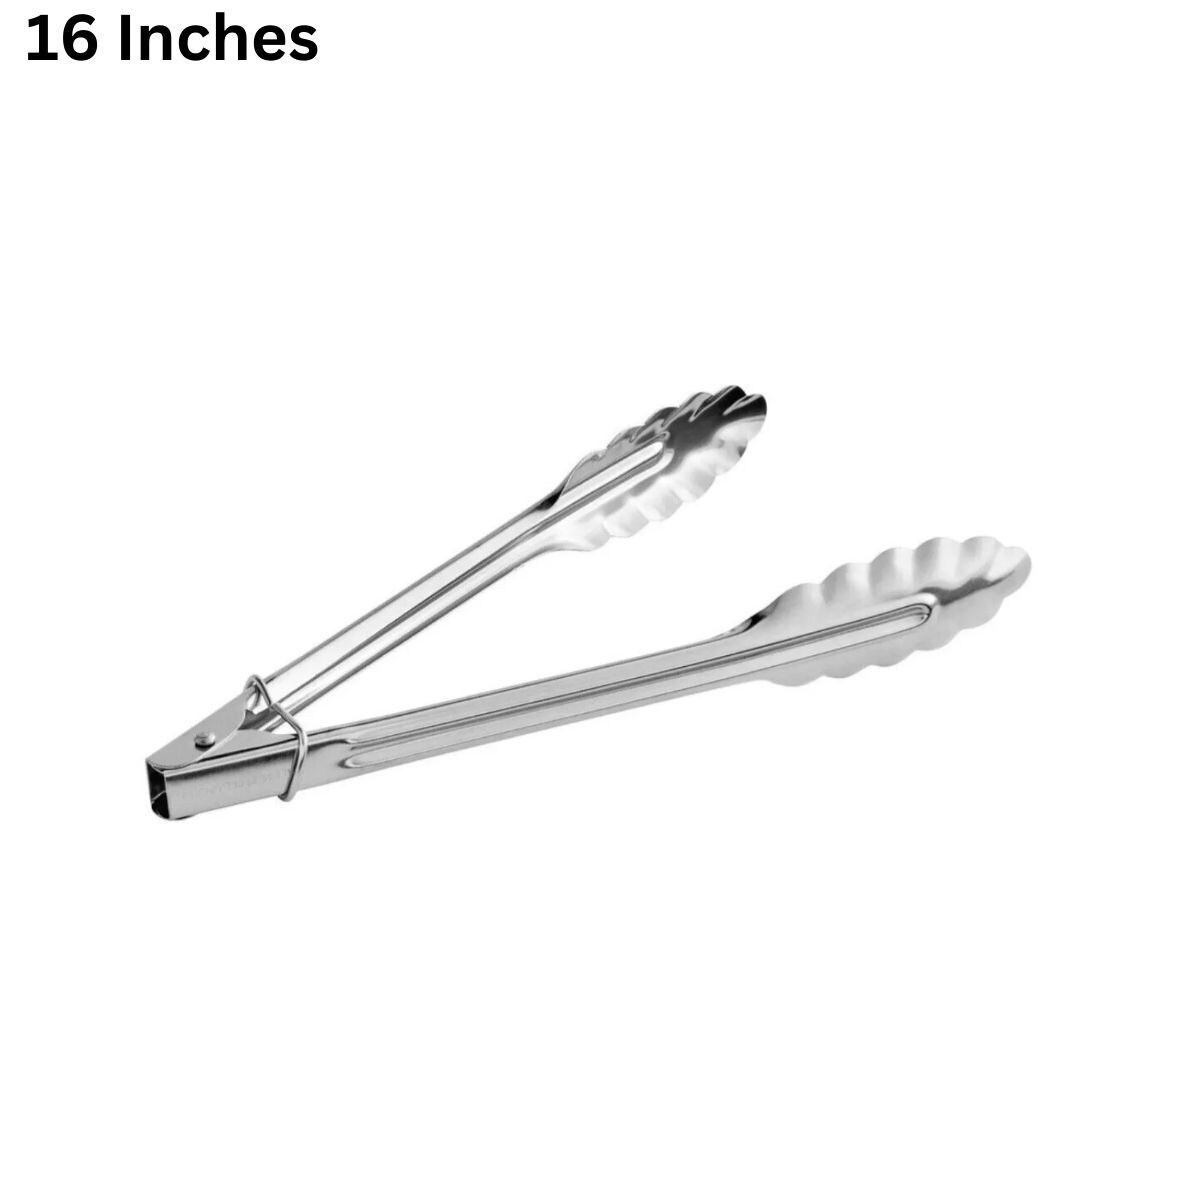 Kitchen Tongs, Stainless Steel Kitchen Tongs for Cooking with